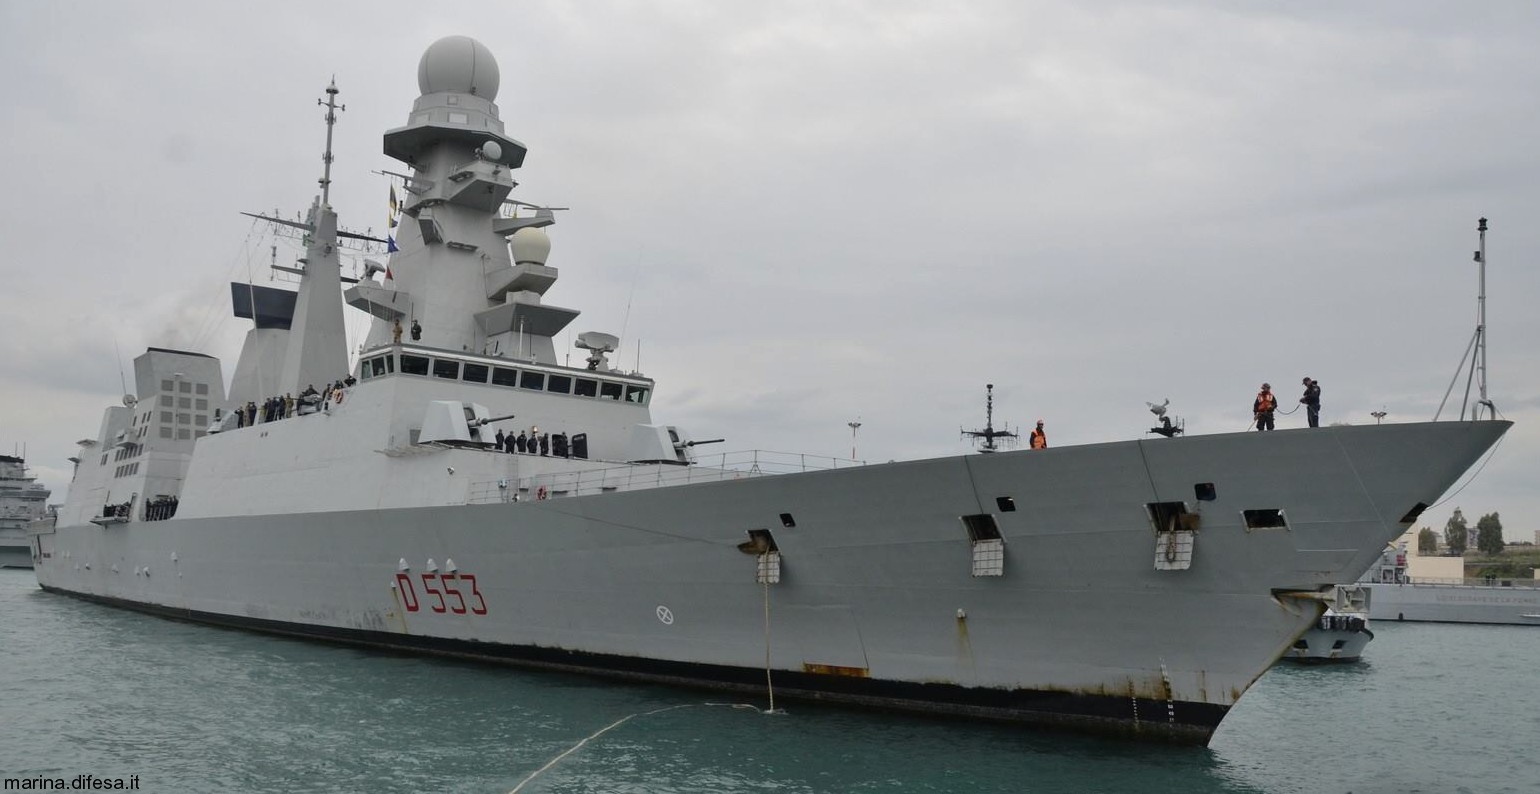 d-553 its andrea doria guided missile destroyer ddgh horizon class italian navy 41